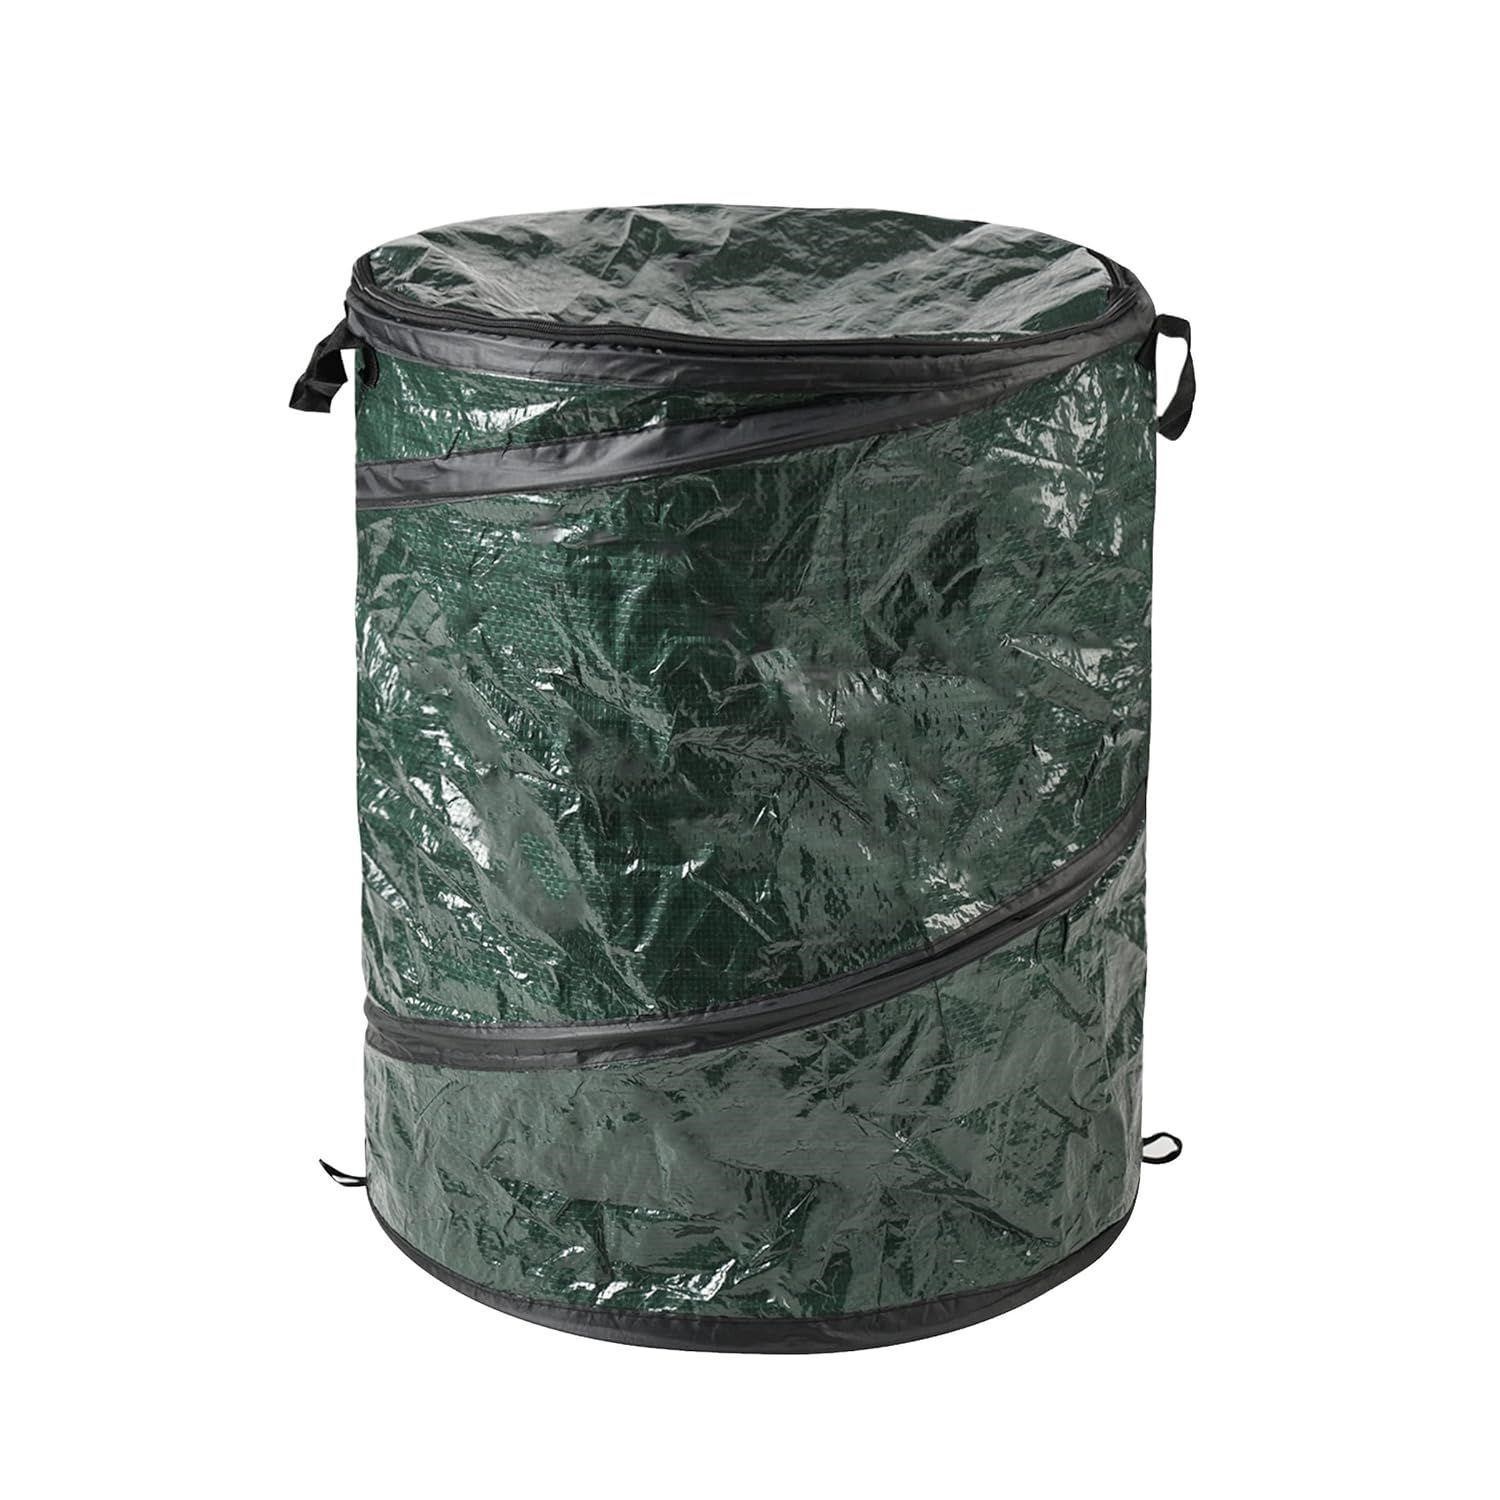 29.5-Gallon Pop Up Outdoor Garbage Can